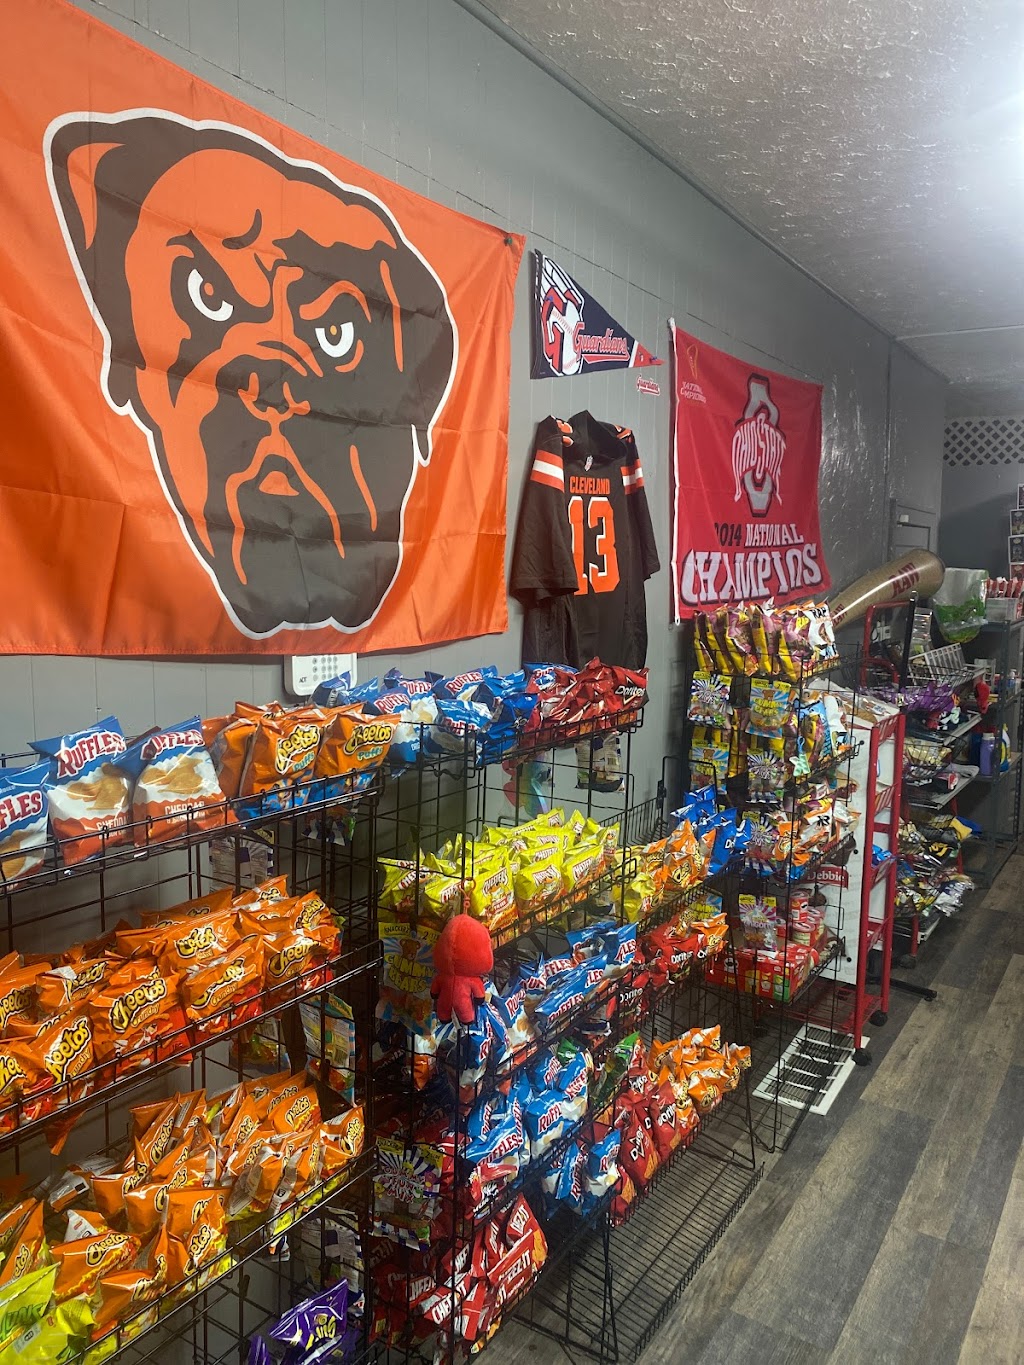 Taylor Mini Mart | 2213 N Taylor Rd, Cleveland Heights, OH 44112 | Phone: (216) 400-6263